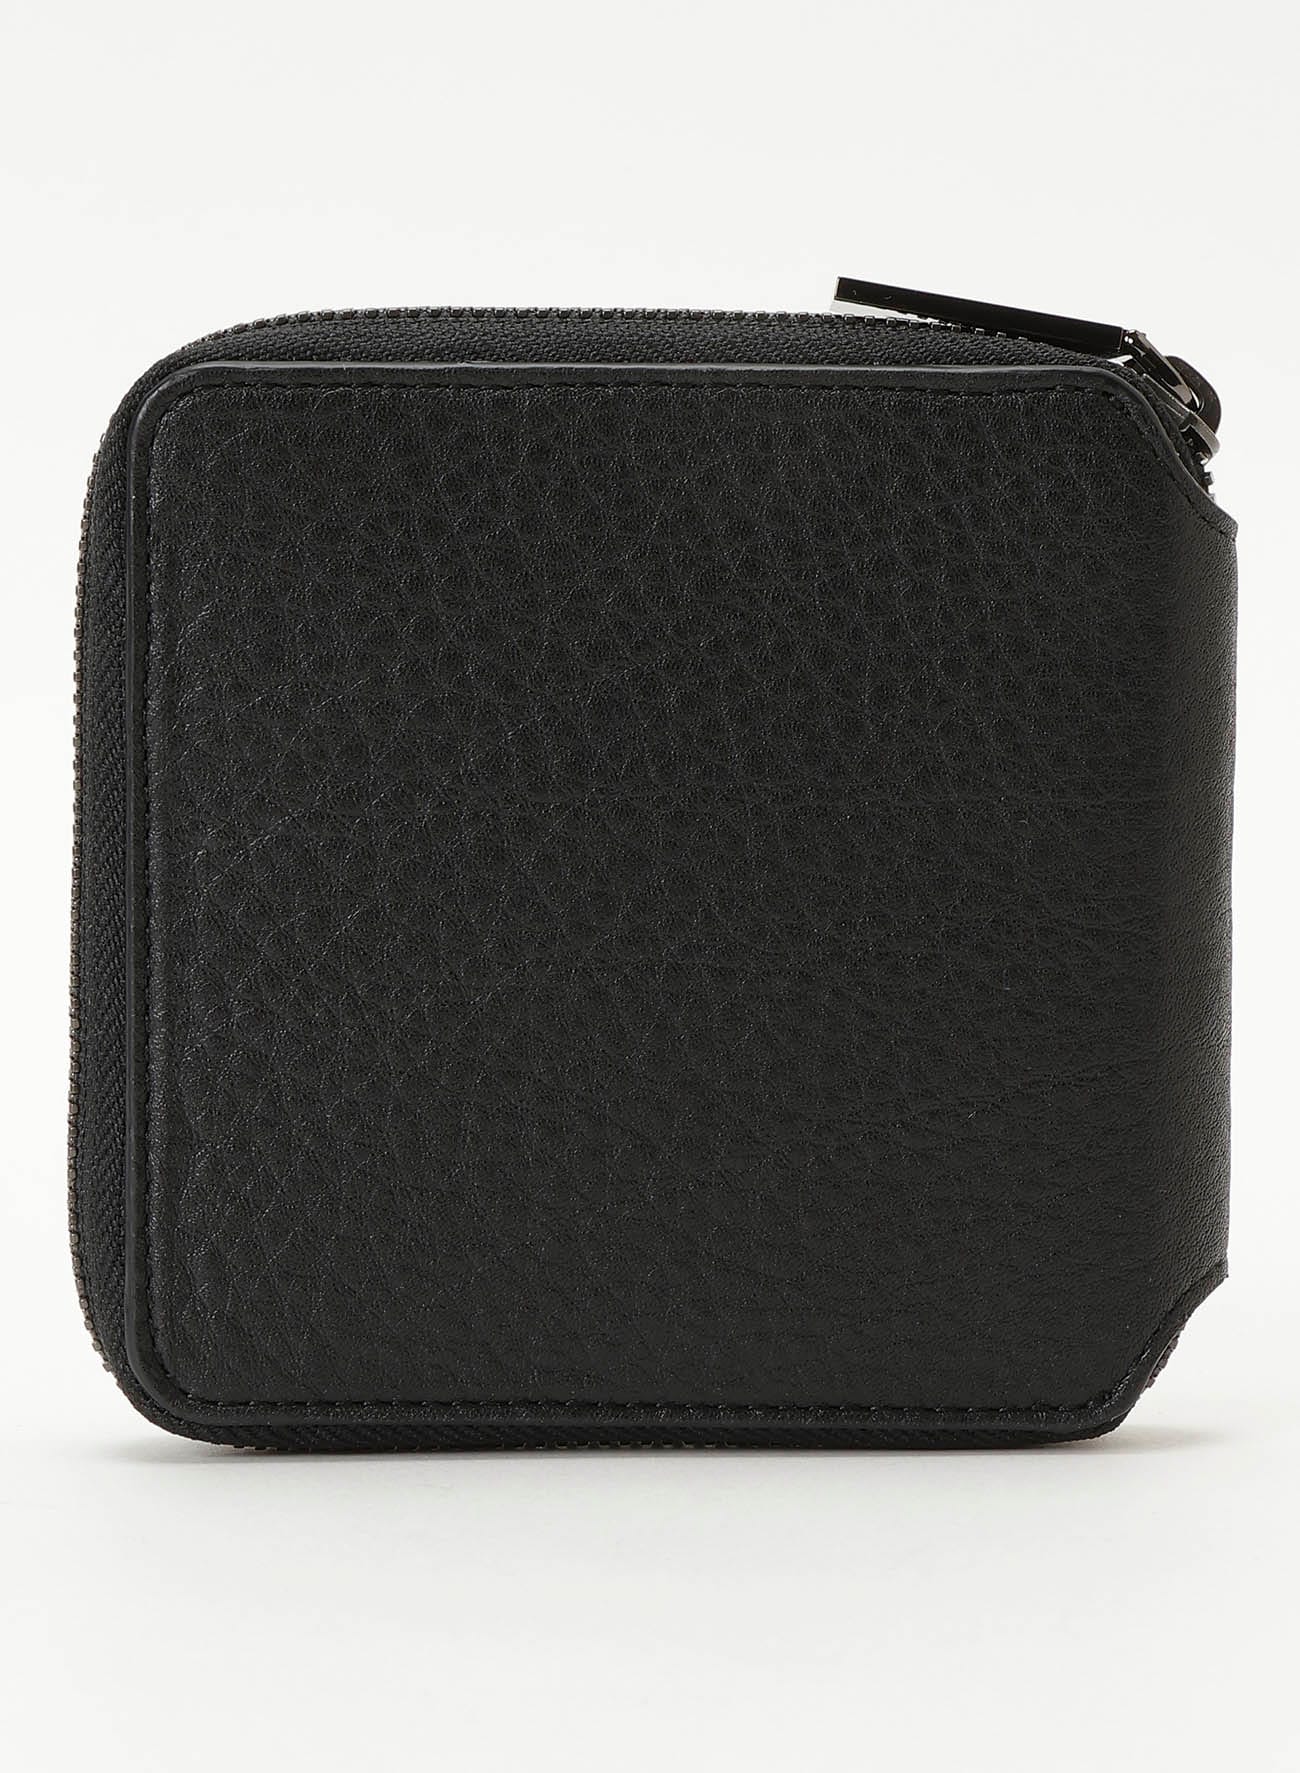 Square wallet